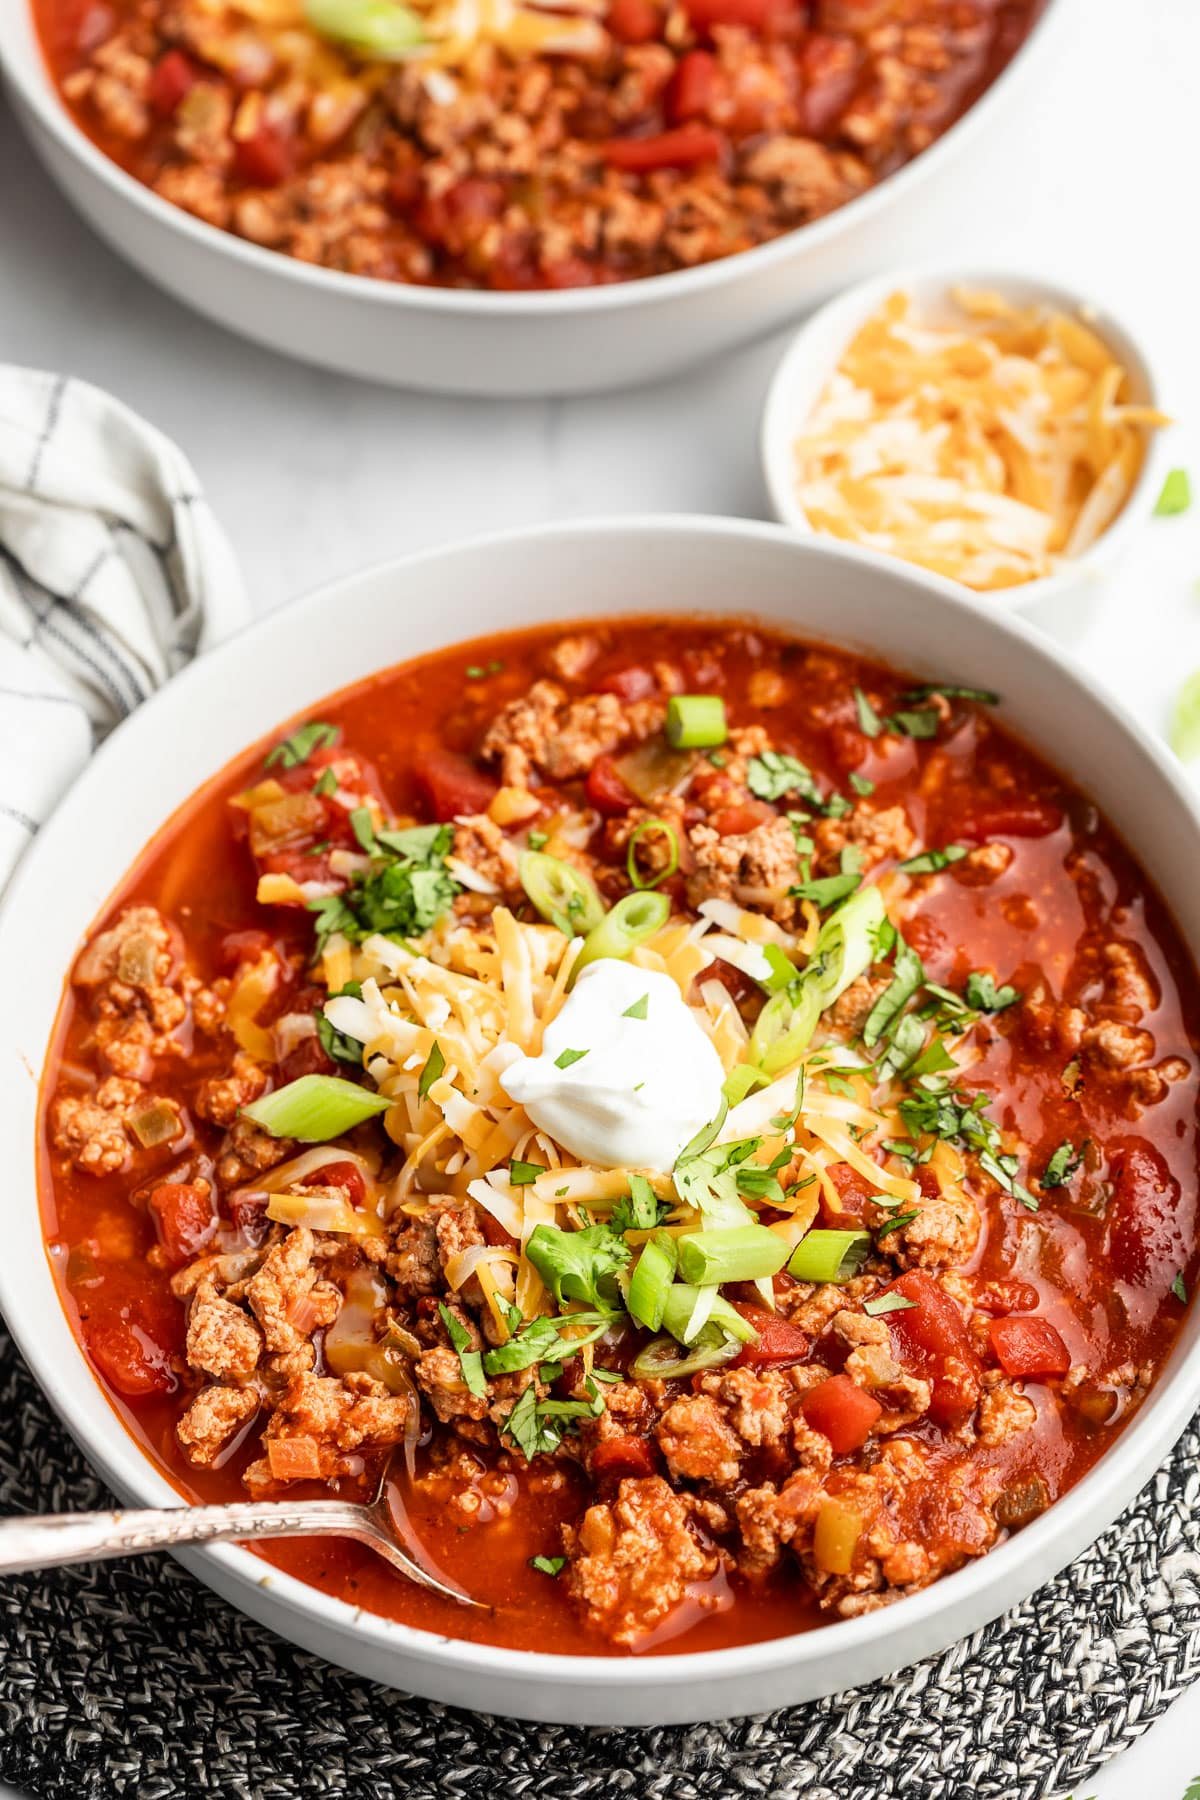 EASY Instant Pot Chili Recipe (Ready in Only 20 Minutes!)